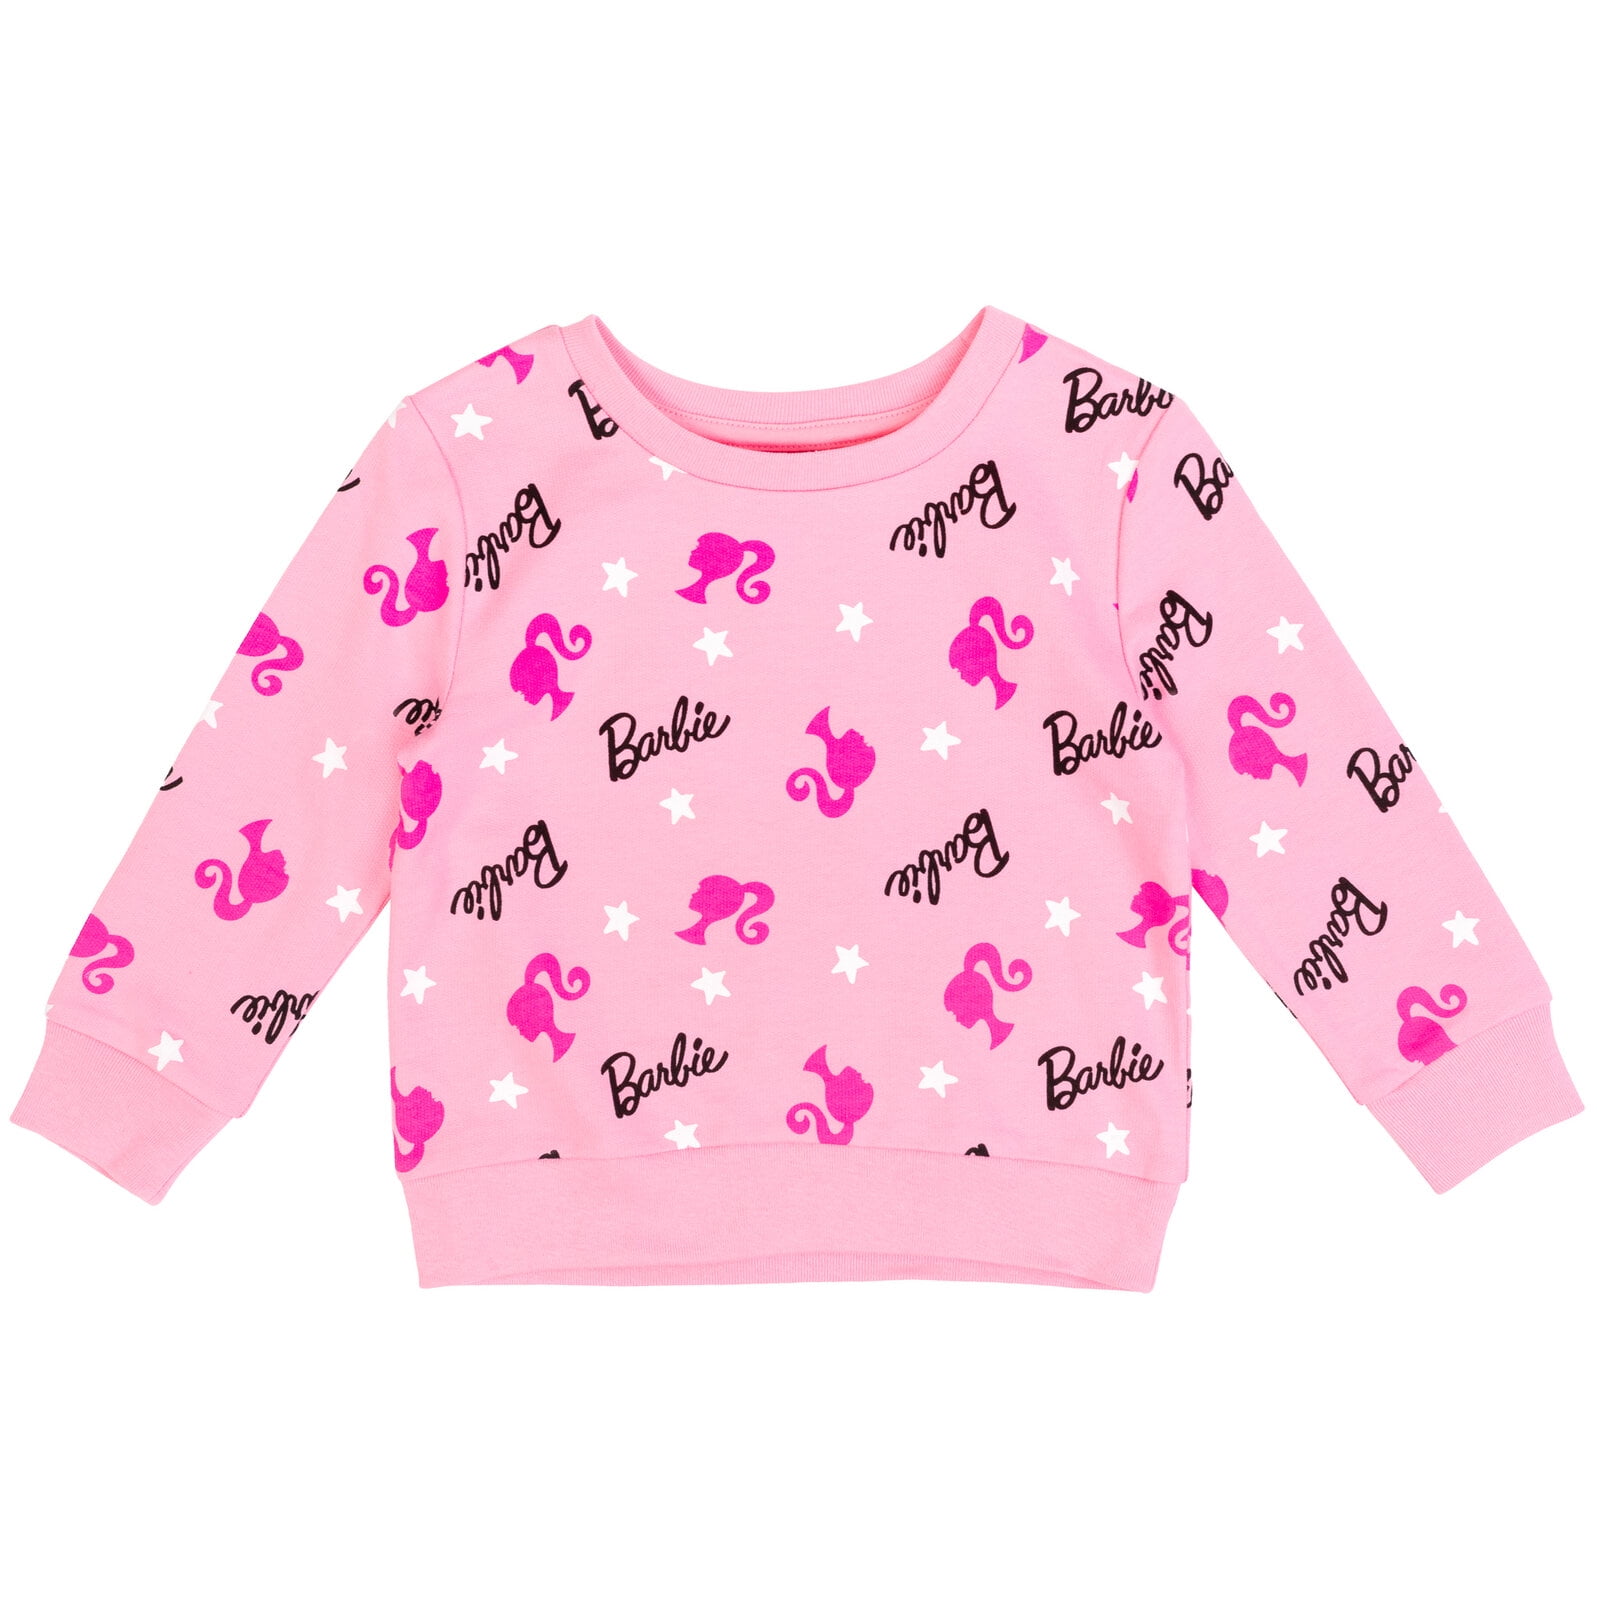 Cute Light Pink #lv oversized sweatshirt for Barbie - Now available at the  online shop! we're doing Whole make over to the site + brand…